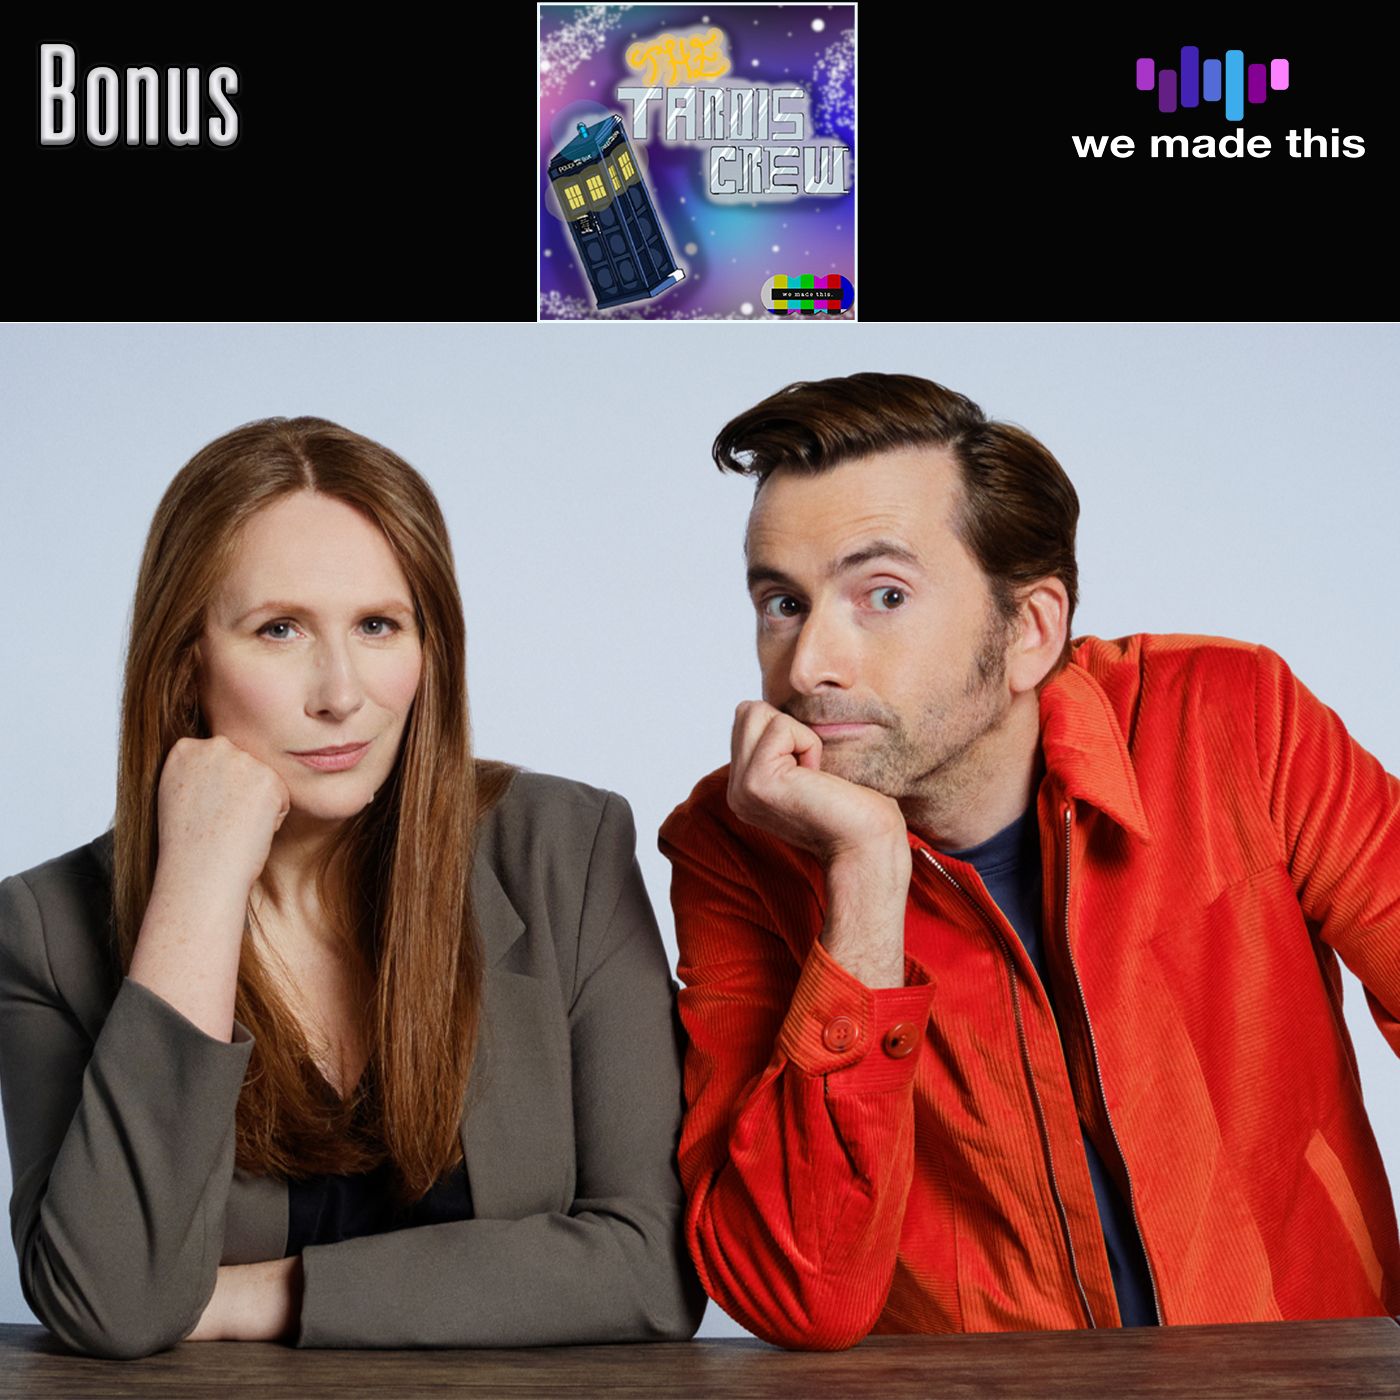 Bonus Episode #4 -The Tenth Doctor and Donna are back!